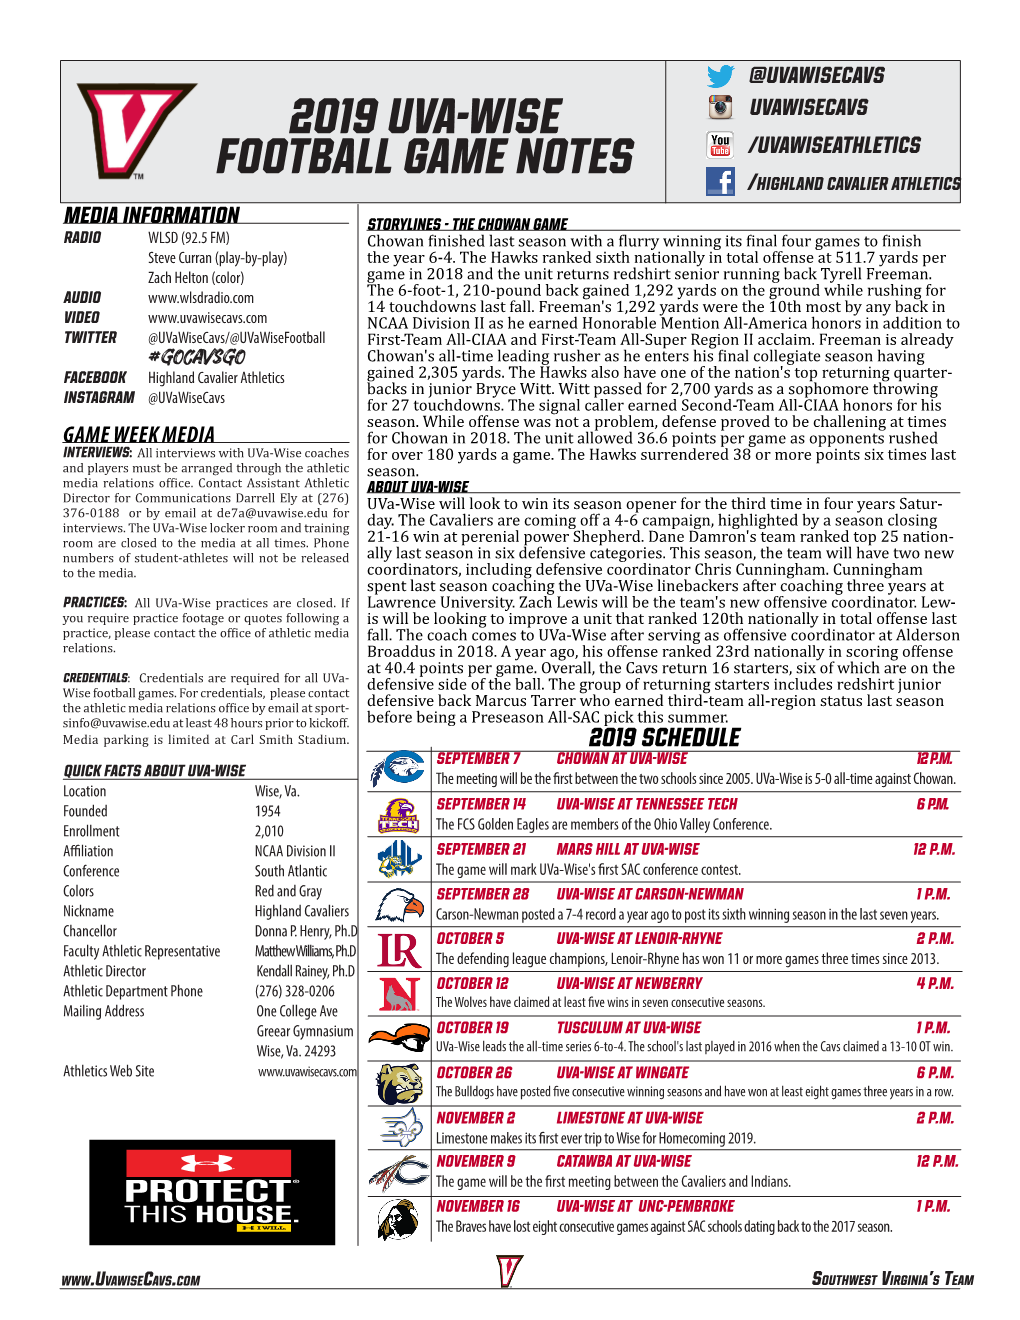 2019 Uva-Wise Football Game Notes